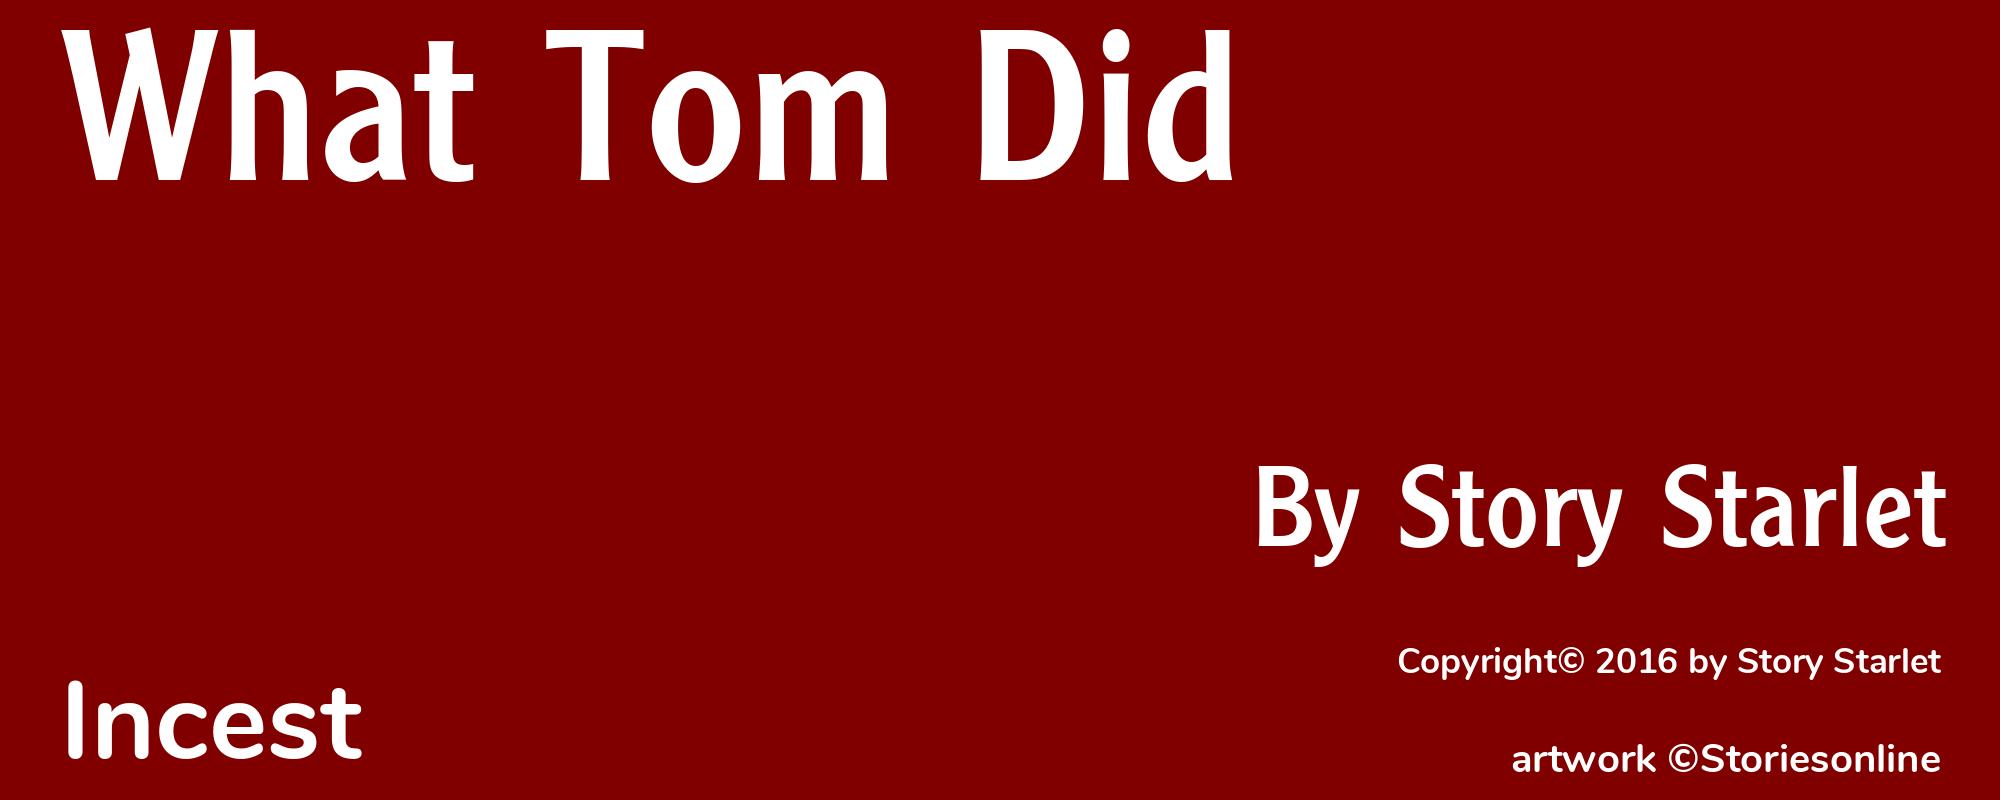 What Tom Did - Cover